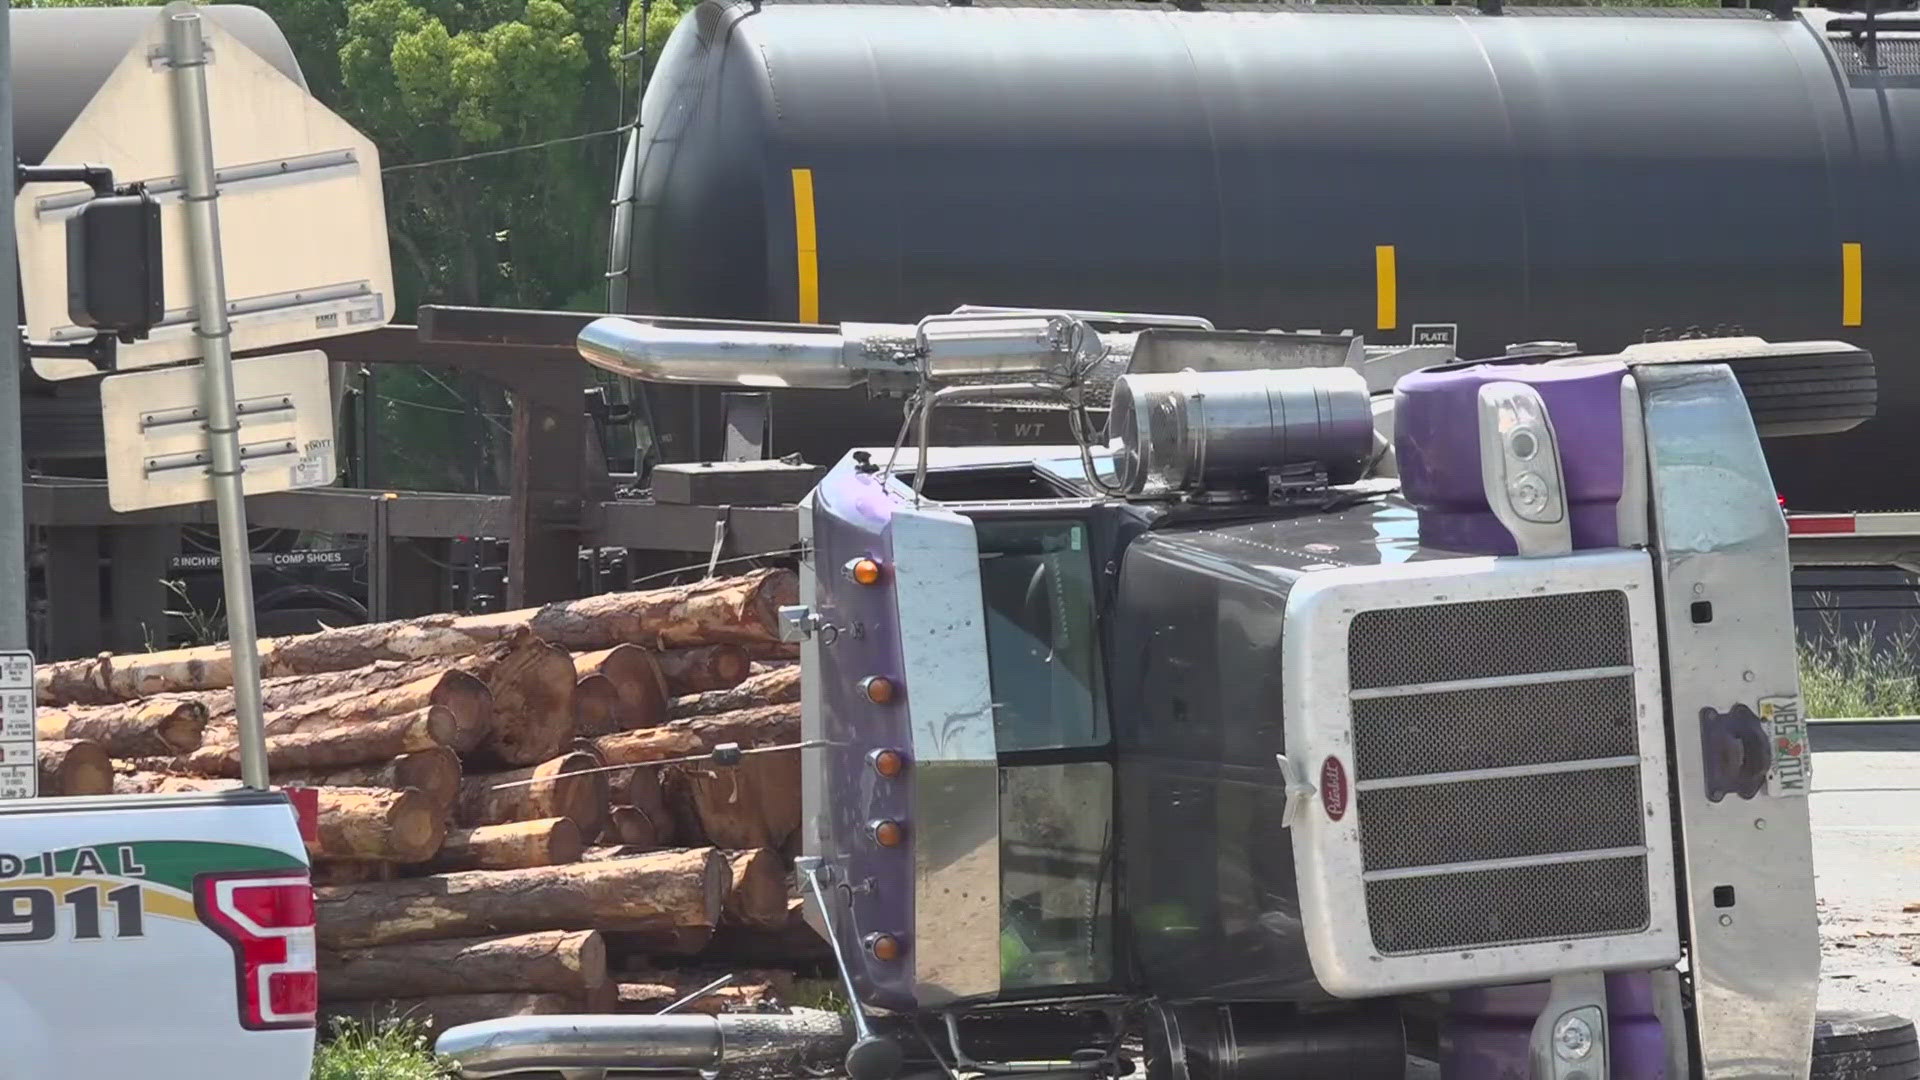 Officials with the Bradford County Sheriff office say the driver of the log truck had stopped for red light, but his trailer was too big, and the back end got stuck.